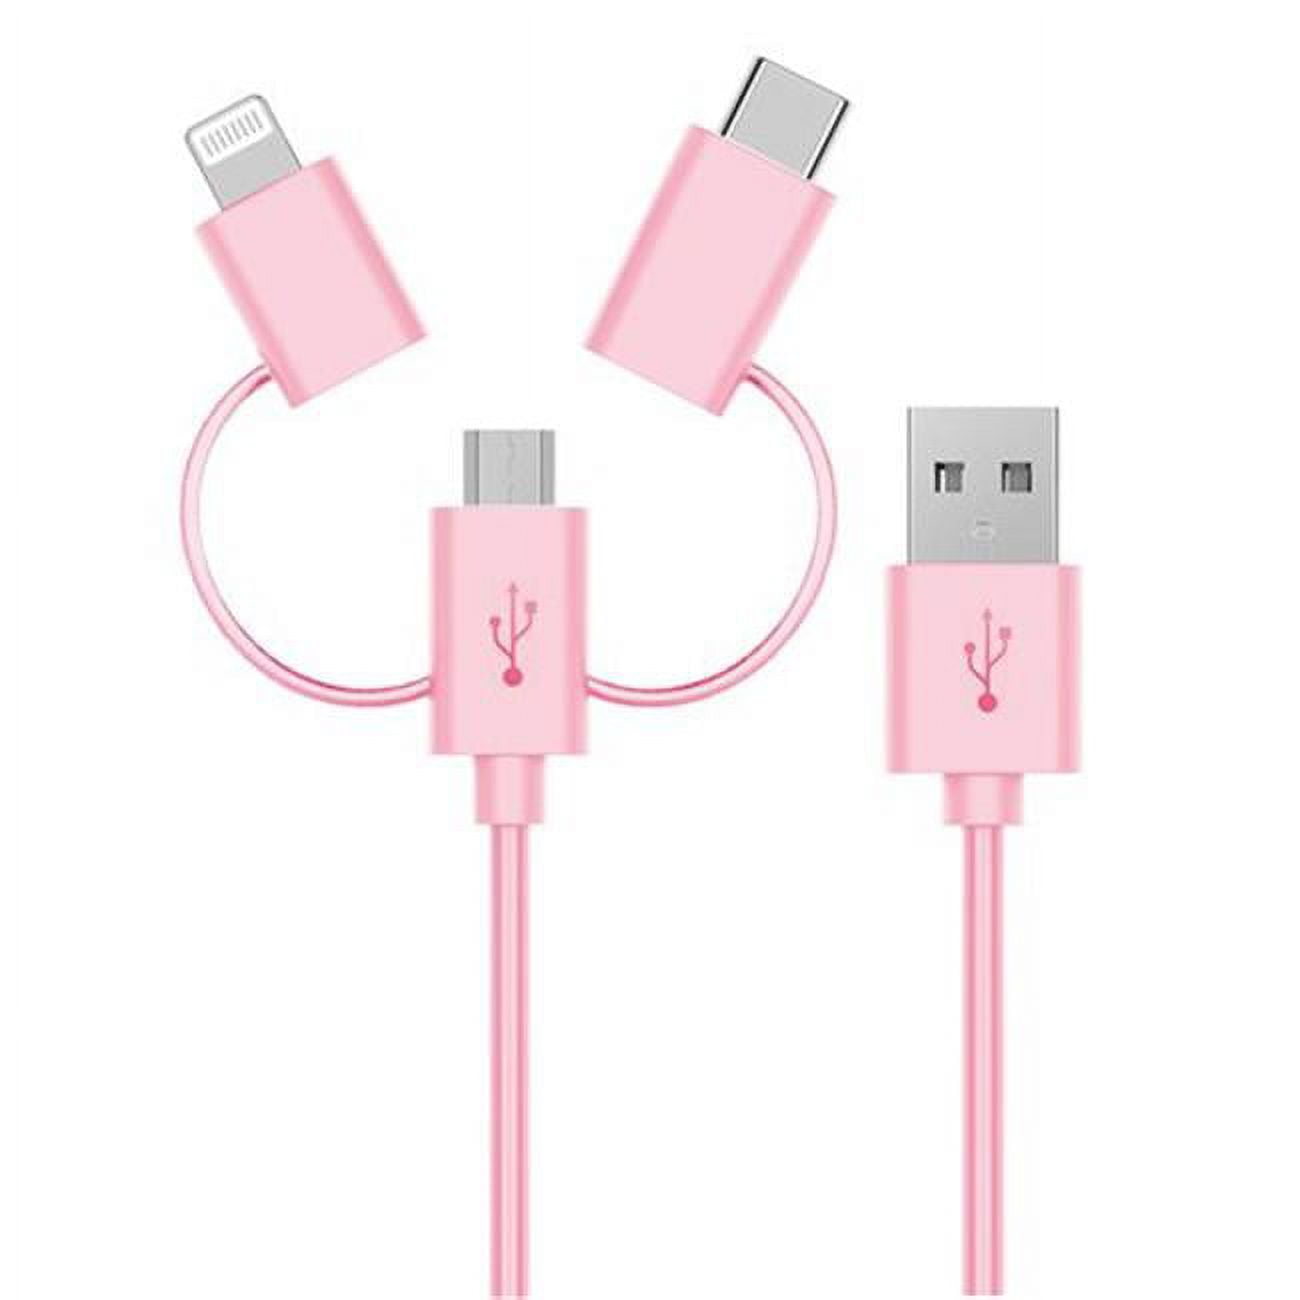 3-in-1 Sync & Charge Cable with Lightning, USB-C, Micro USB Connectors - 4 ft. - Rose Gold -  ServerUSA, SE1714878